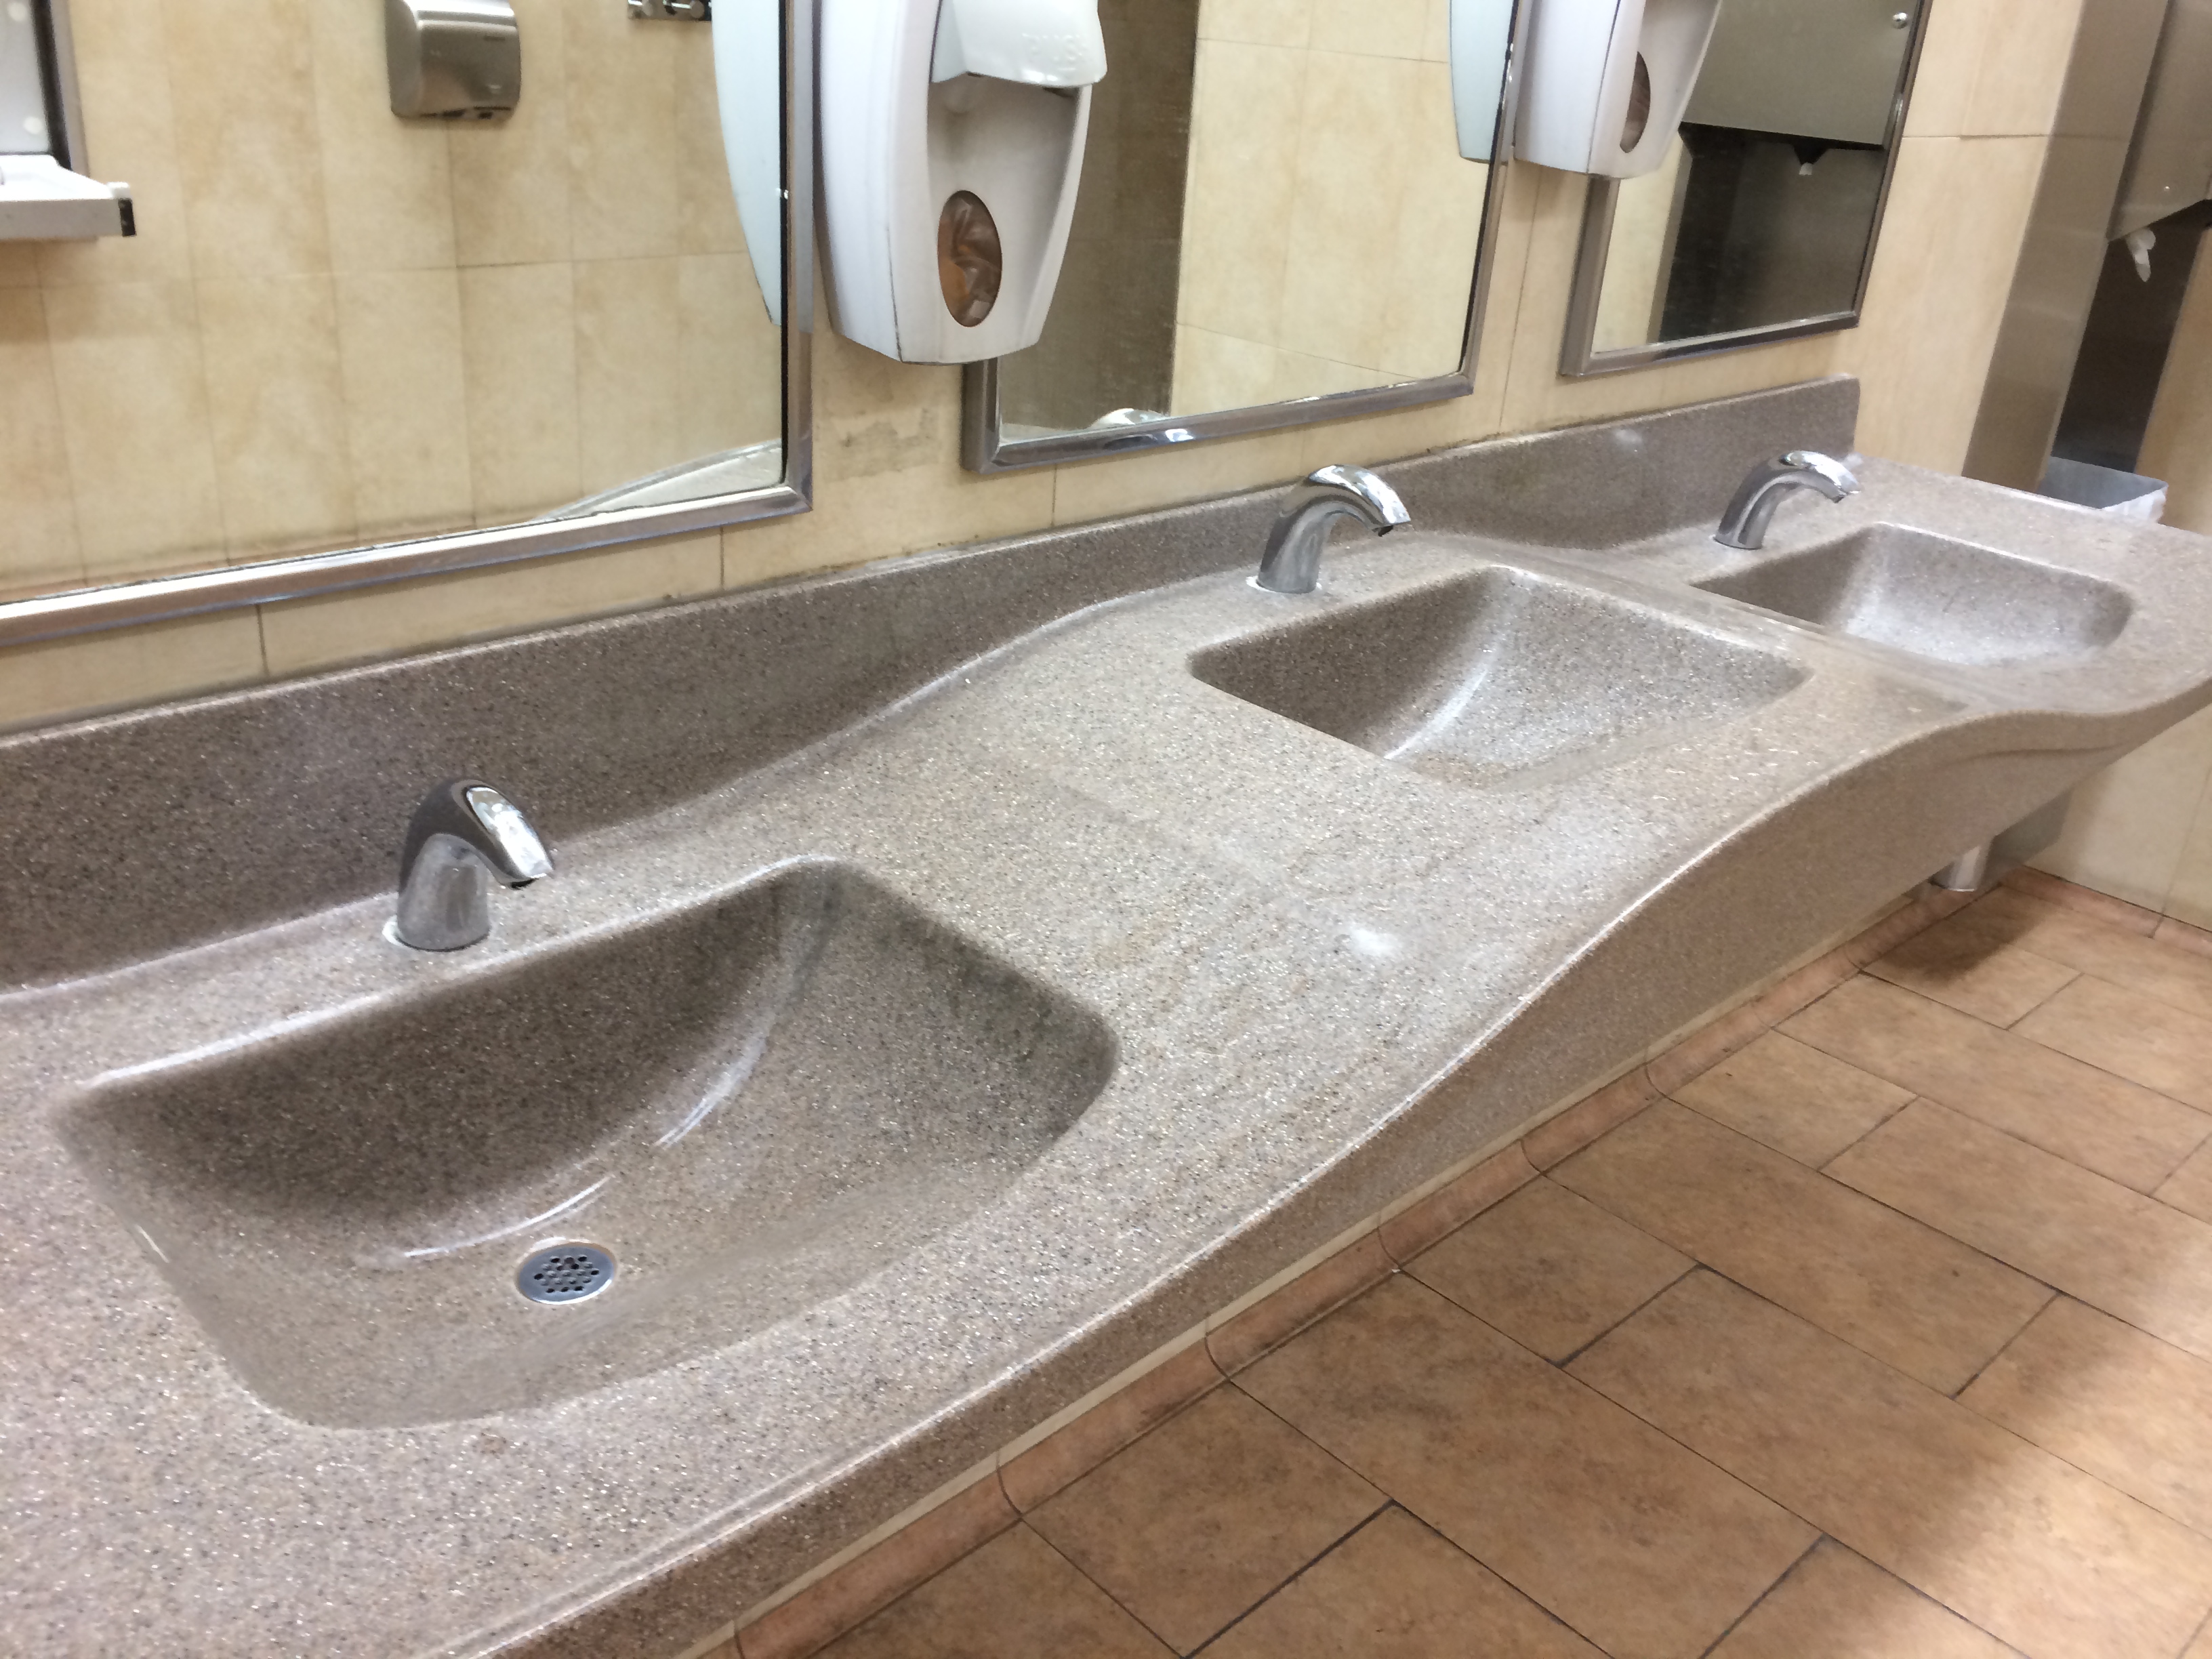  touchless faucets